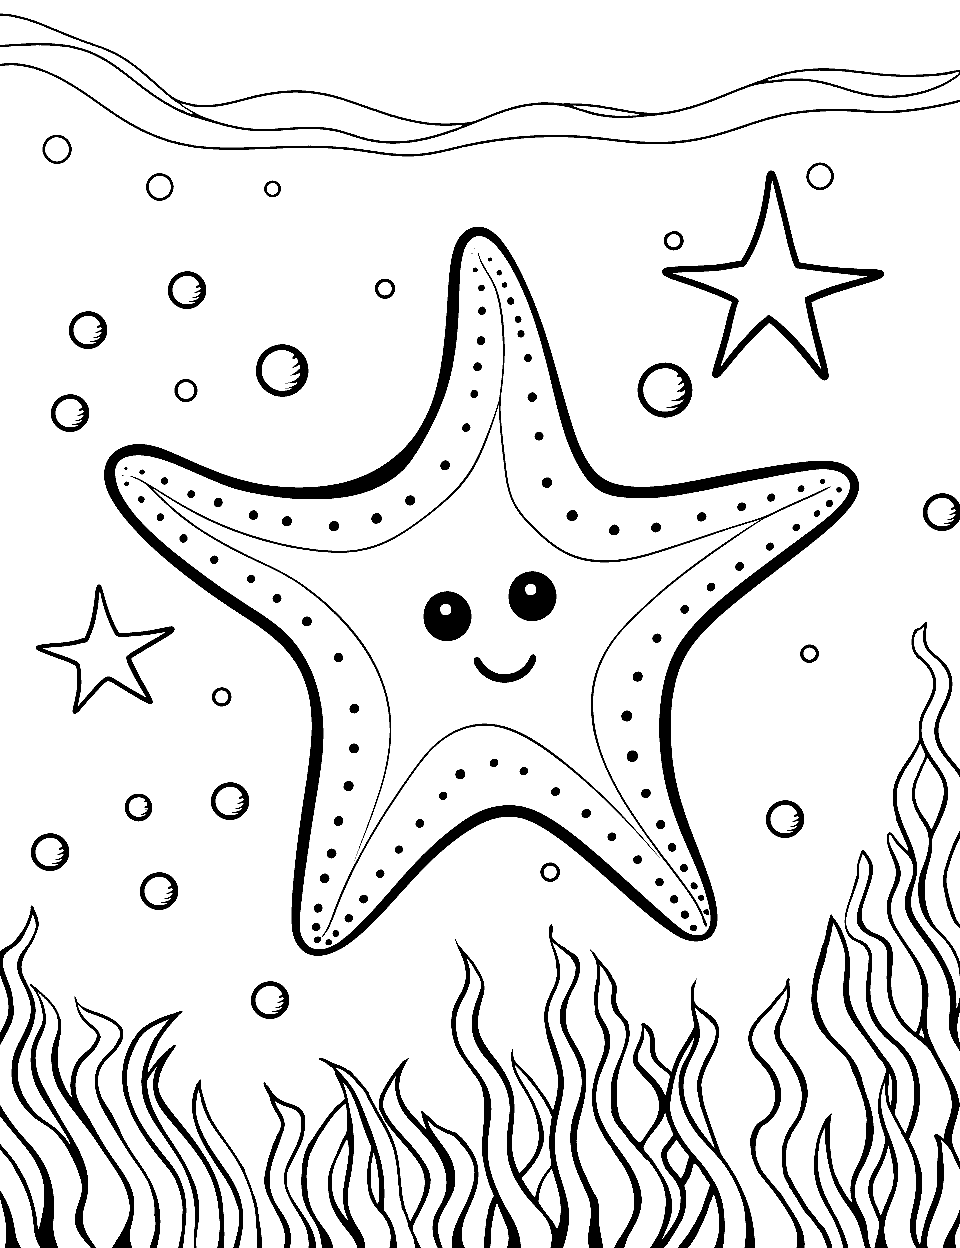 Underwater Starfish Star Coloring Page - An easy-to-draw starfish with a cute face smiling.